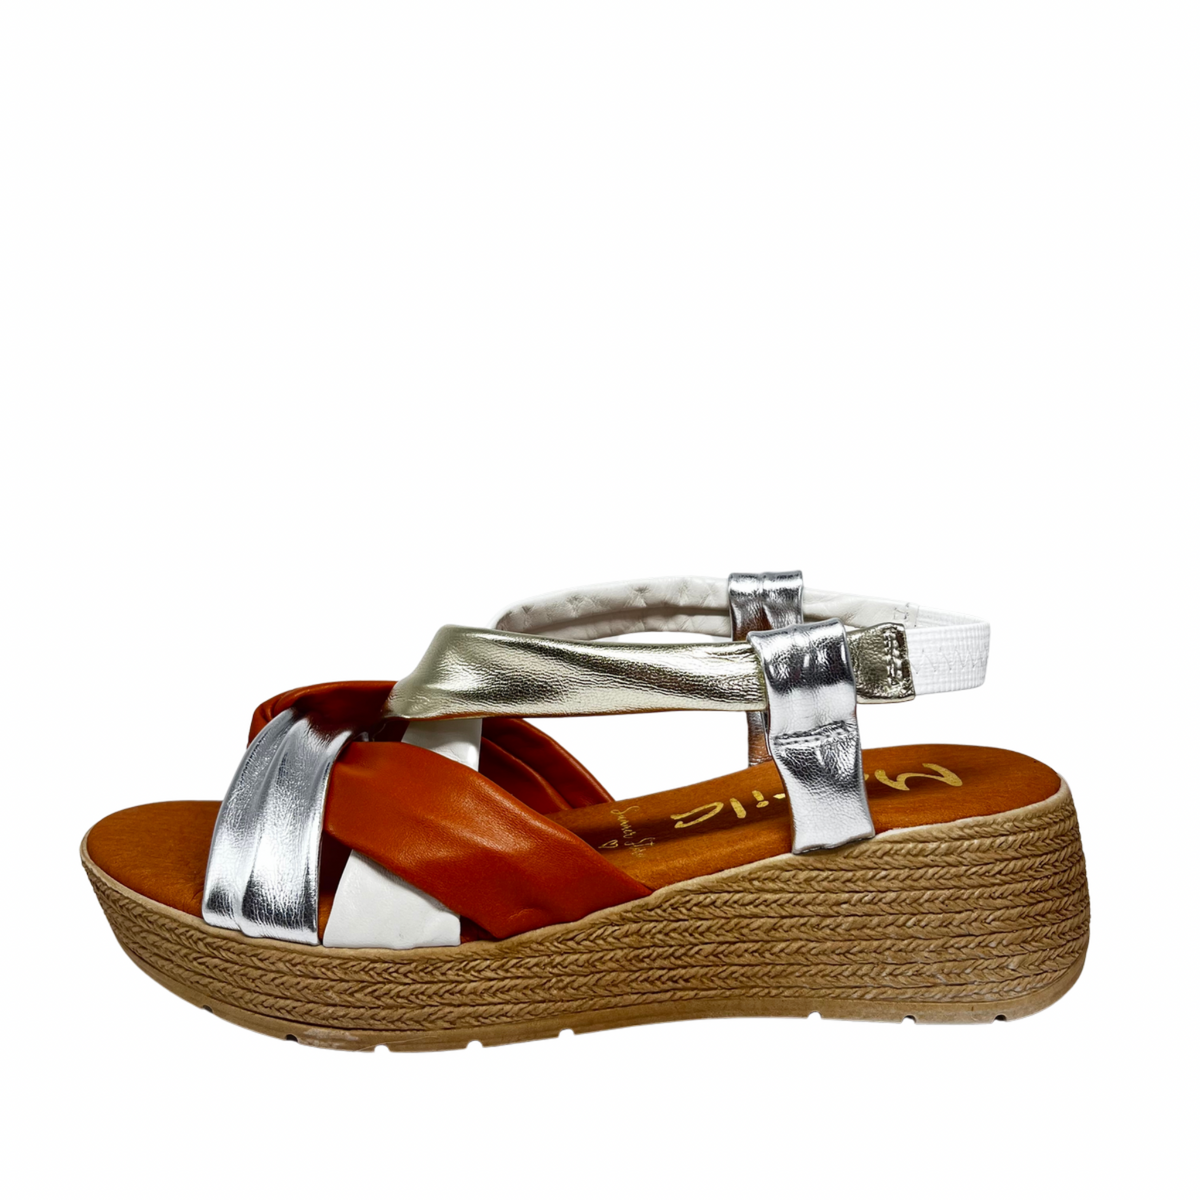 Marila Brown Leather Wedge Sandal With Elastic Strap